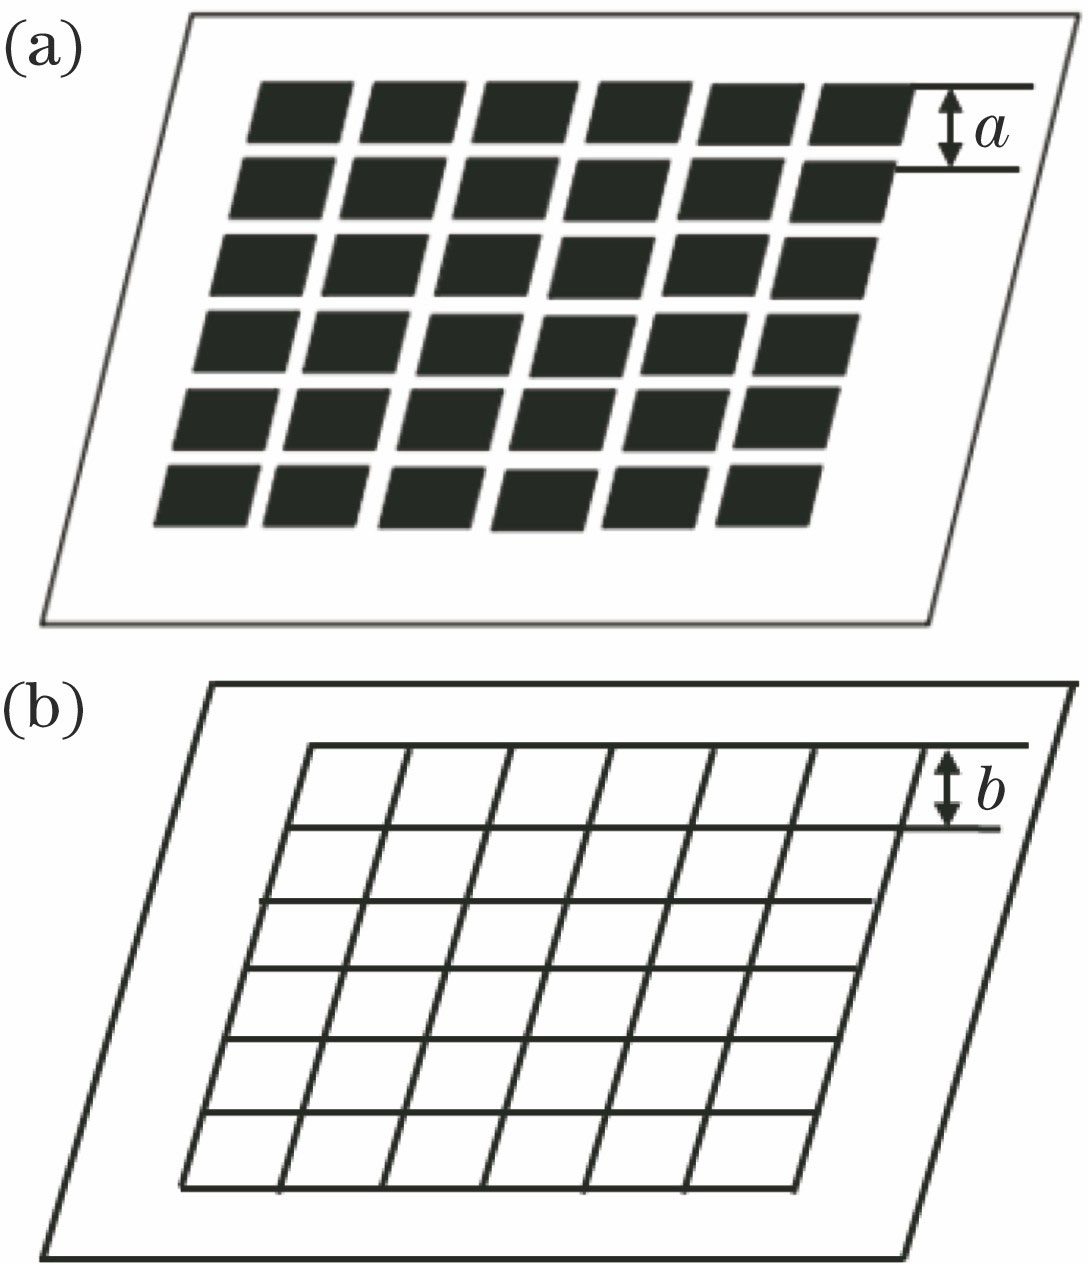 Schematics of two dimensional grid structures of (a) micro-graphic array and (b) square aperture micro-lens array